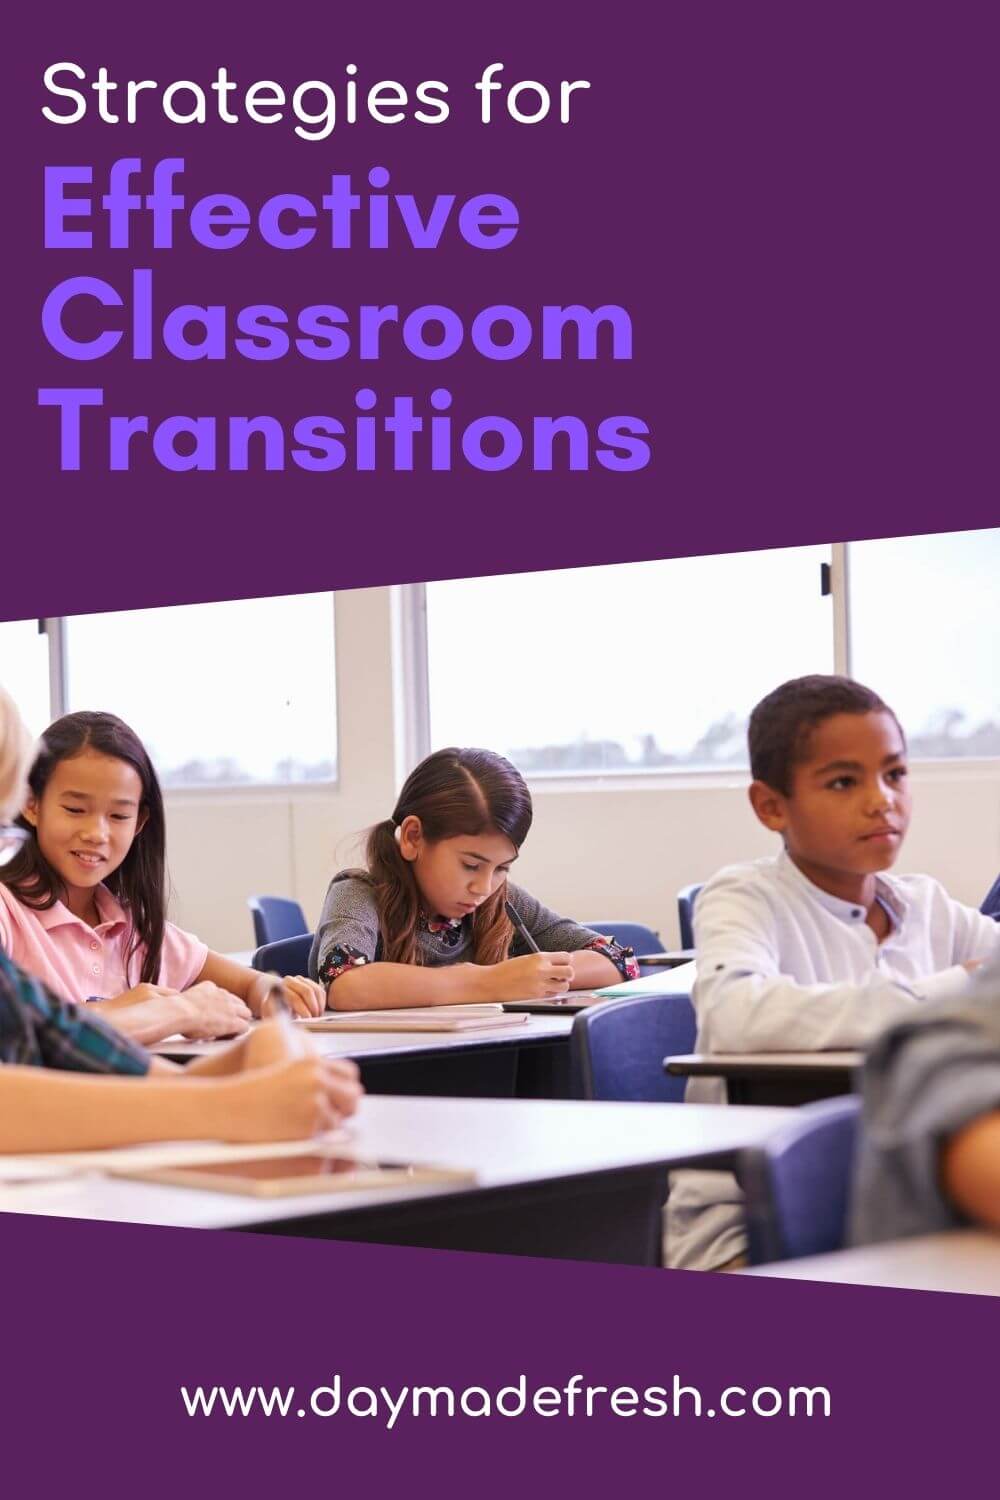 Image: Elementary students working independently and productively at desks; Text: Effective Elementary Classroom Transitions